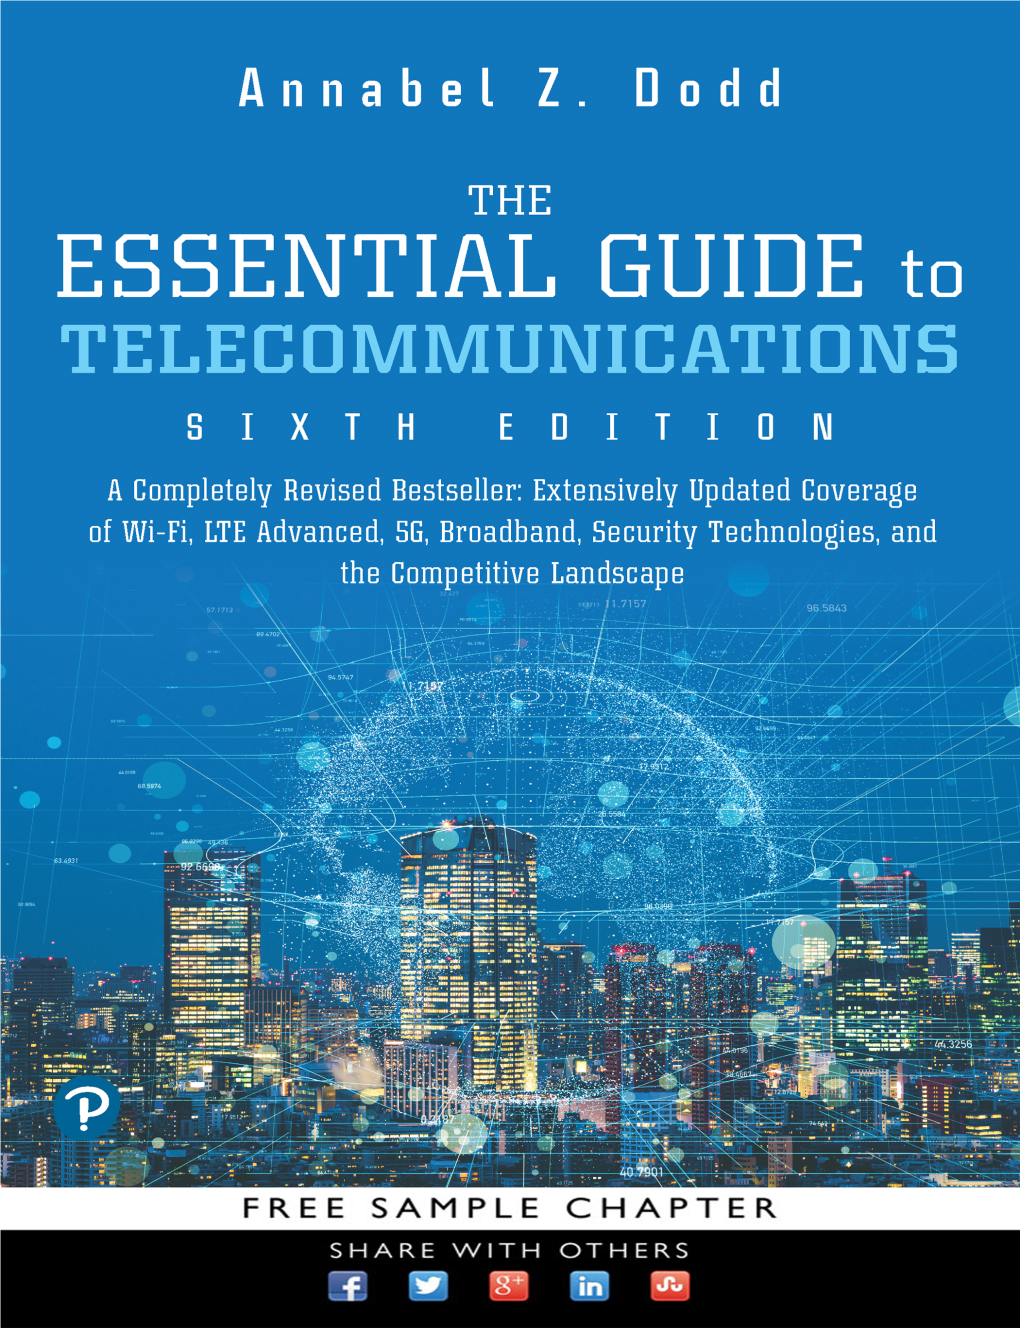 The Essential Guide to Telecommunications, Sixth Edition